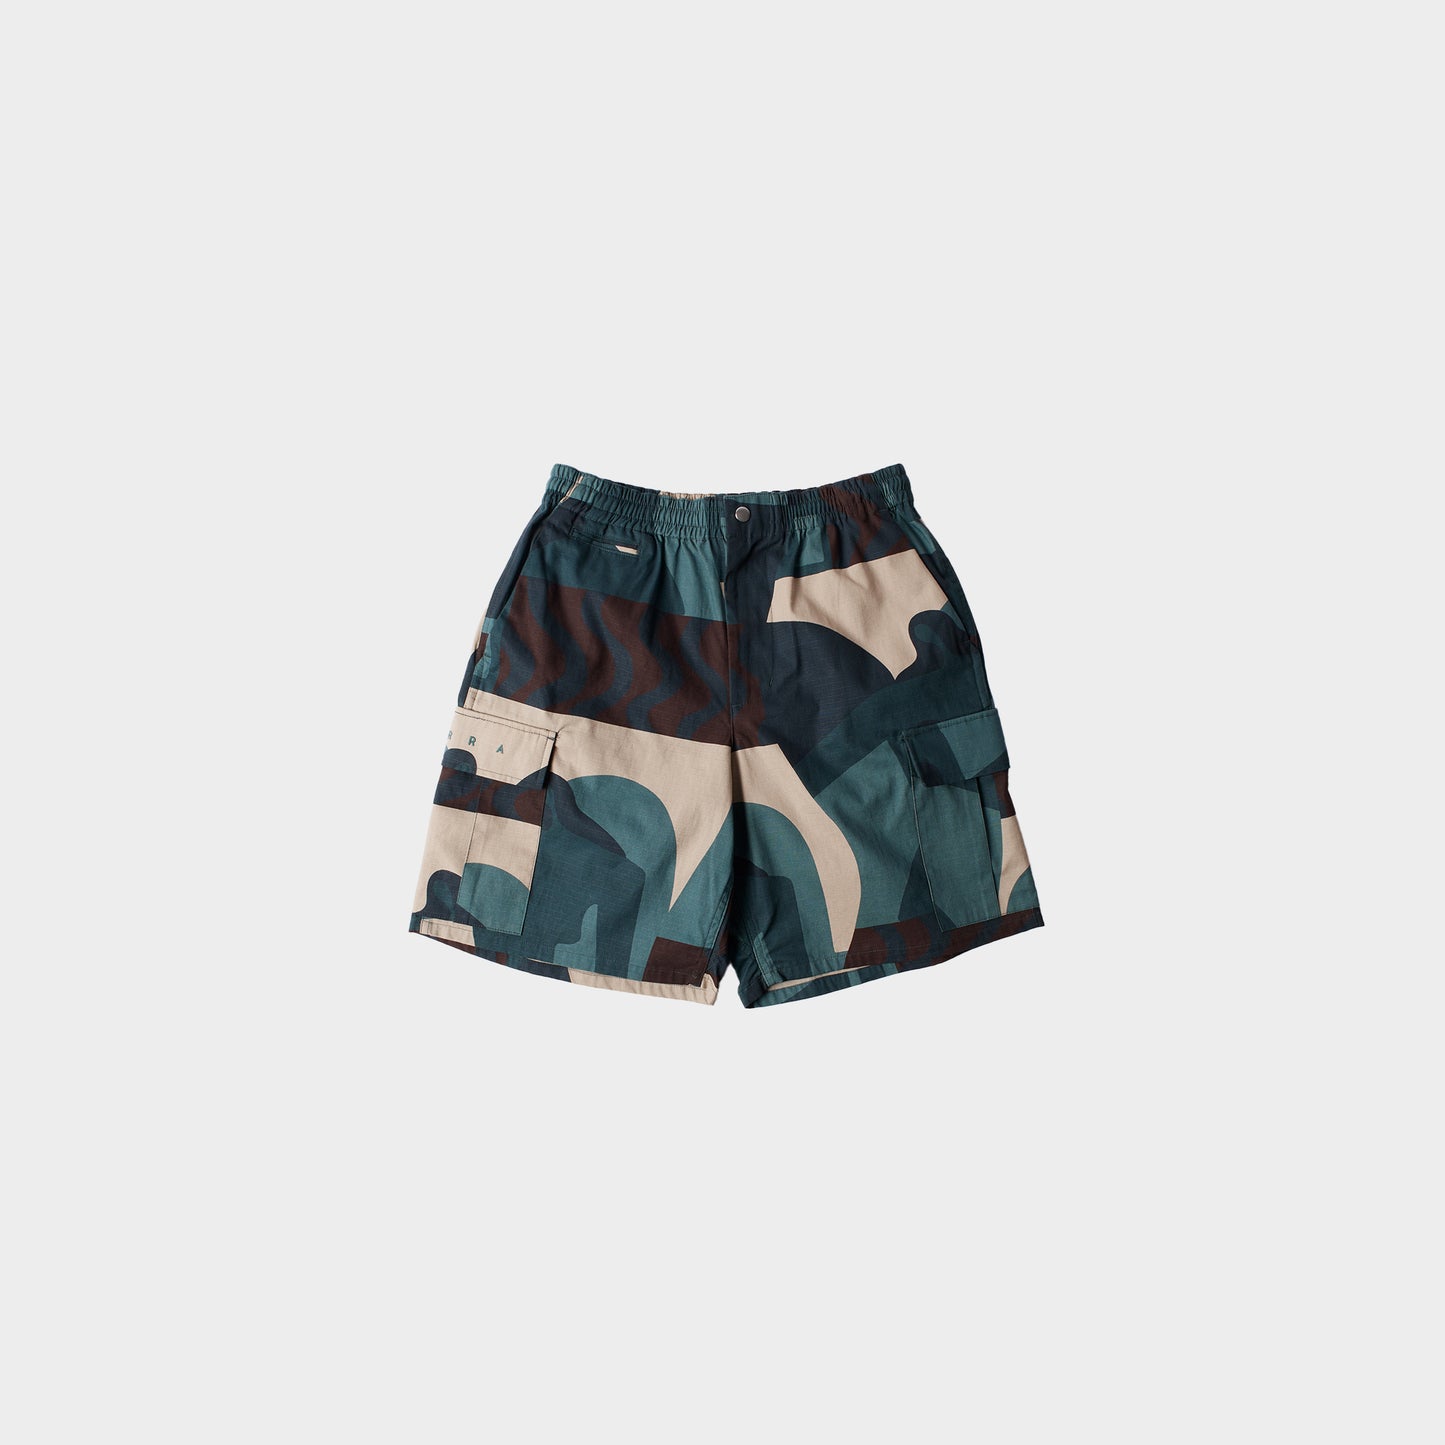 byParra Distorted Camo Shorts in der Farbe green